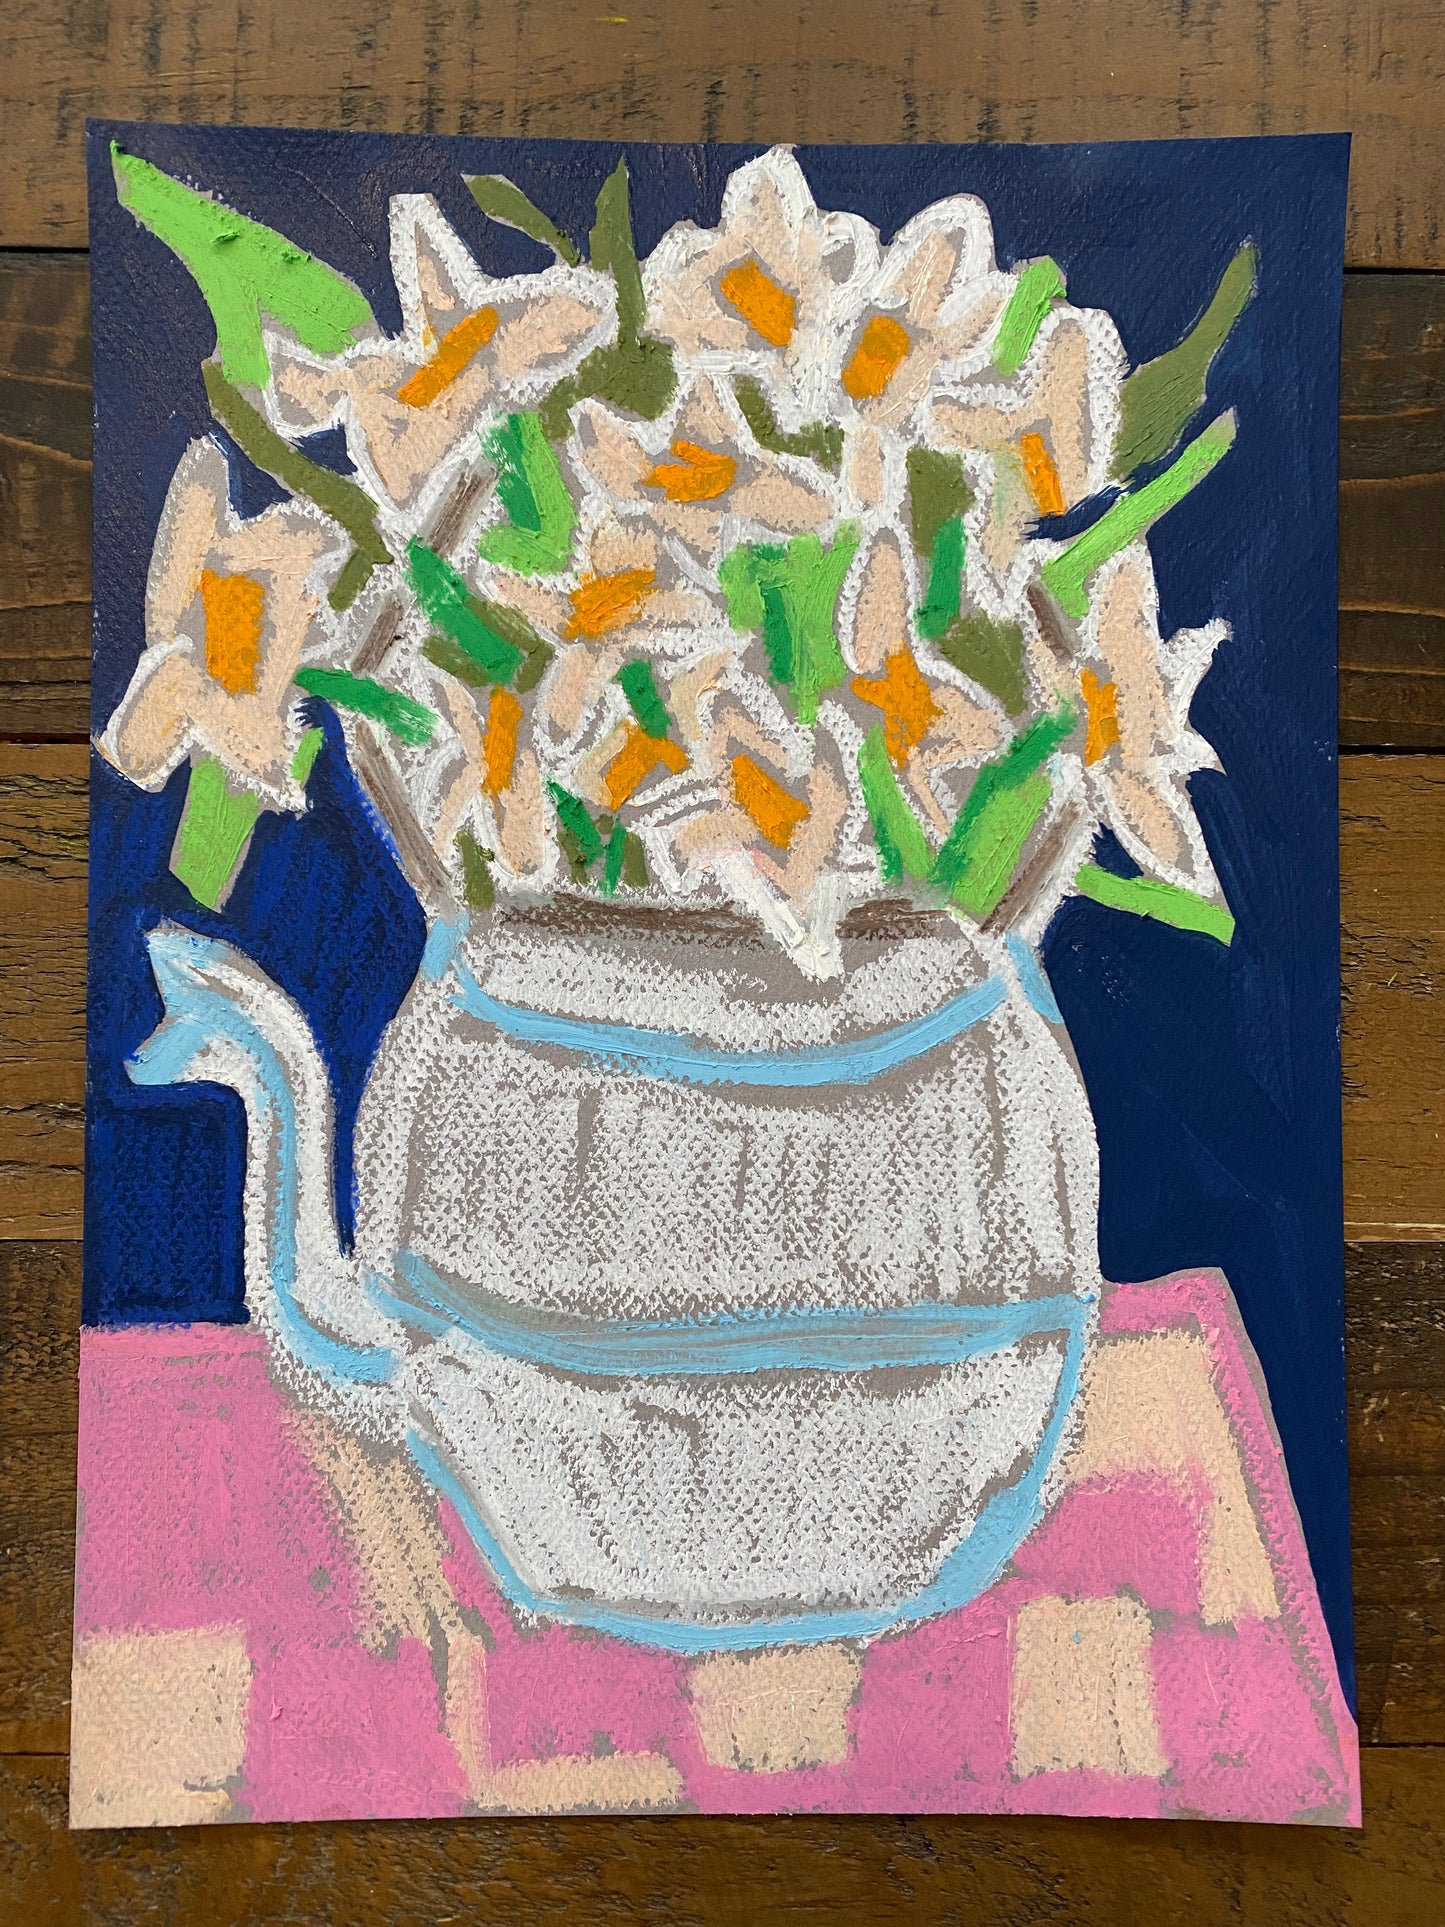 Flowers in a Teapot / Original Mixed Media / Pink / Navy Blue / Green / White